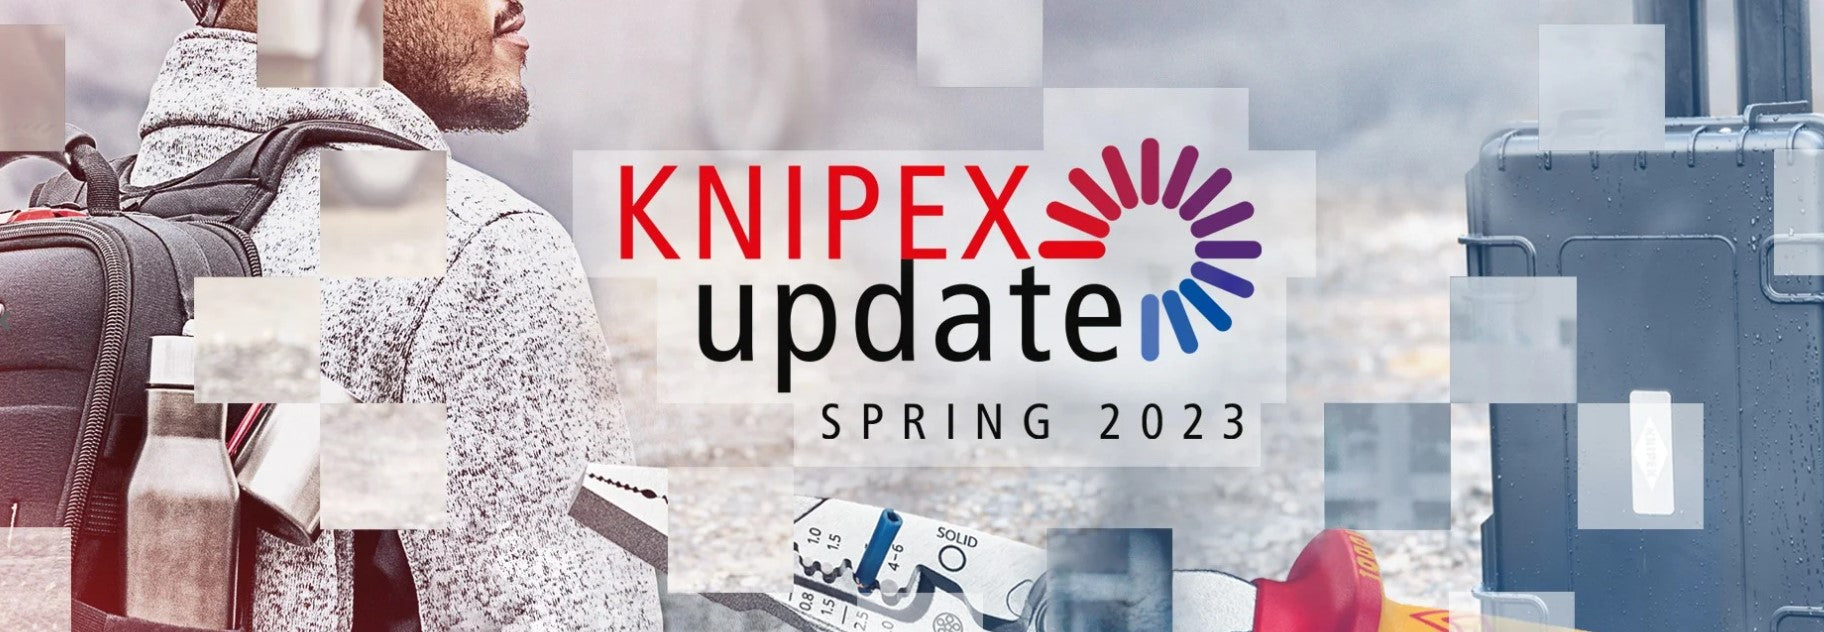 Knipex Update Spring 2023